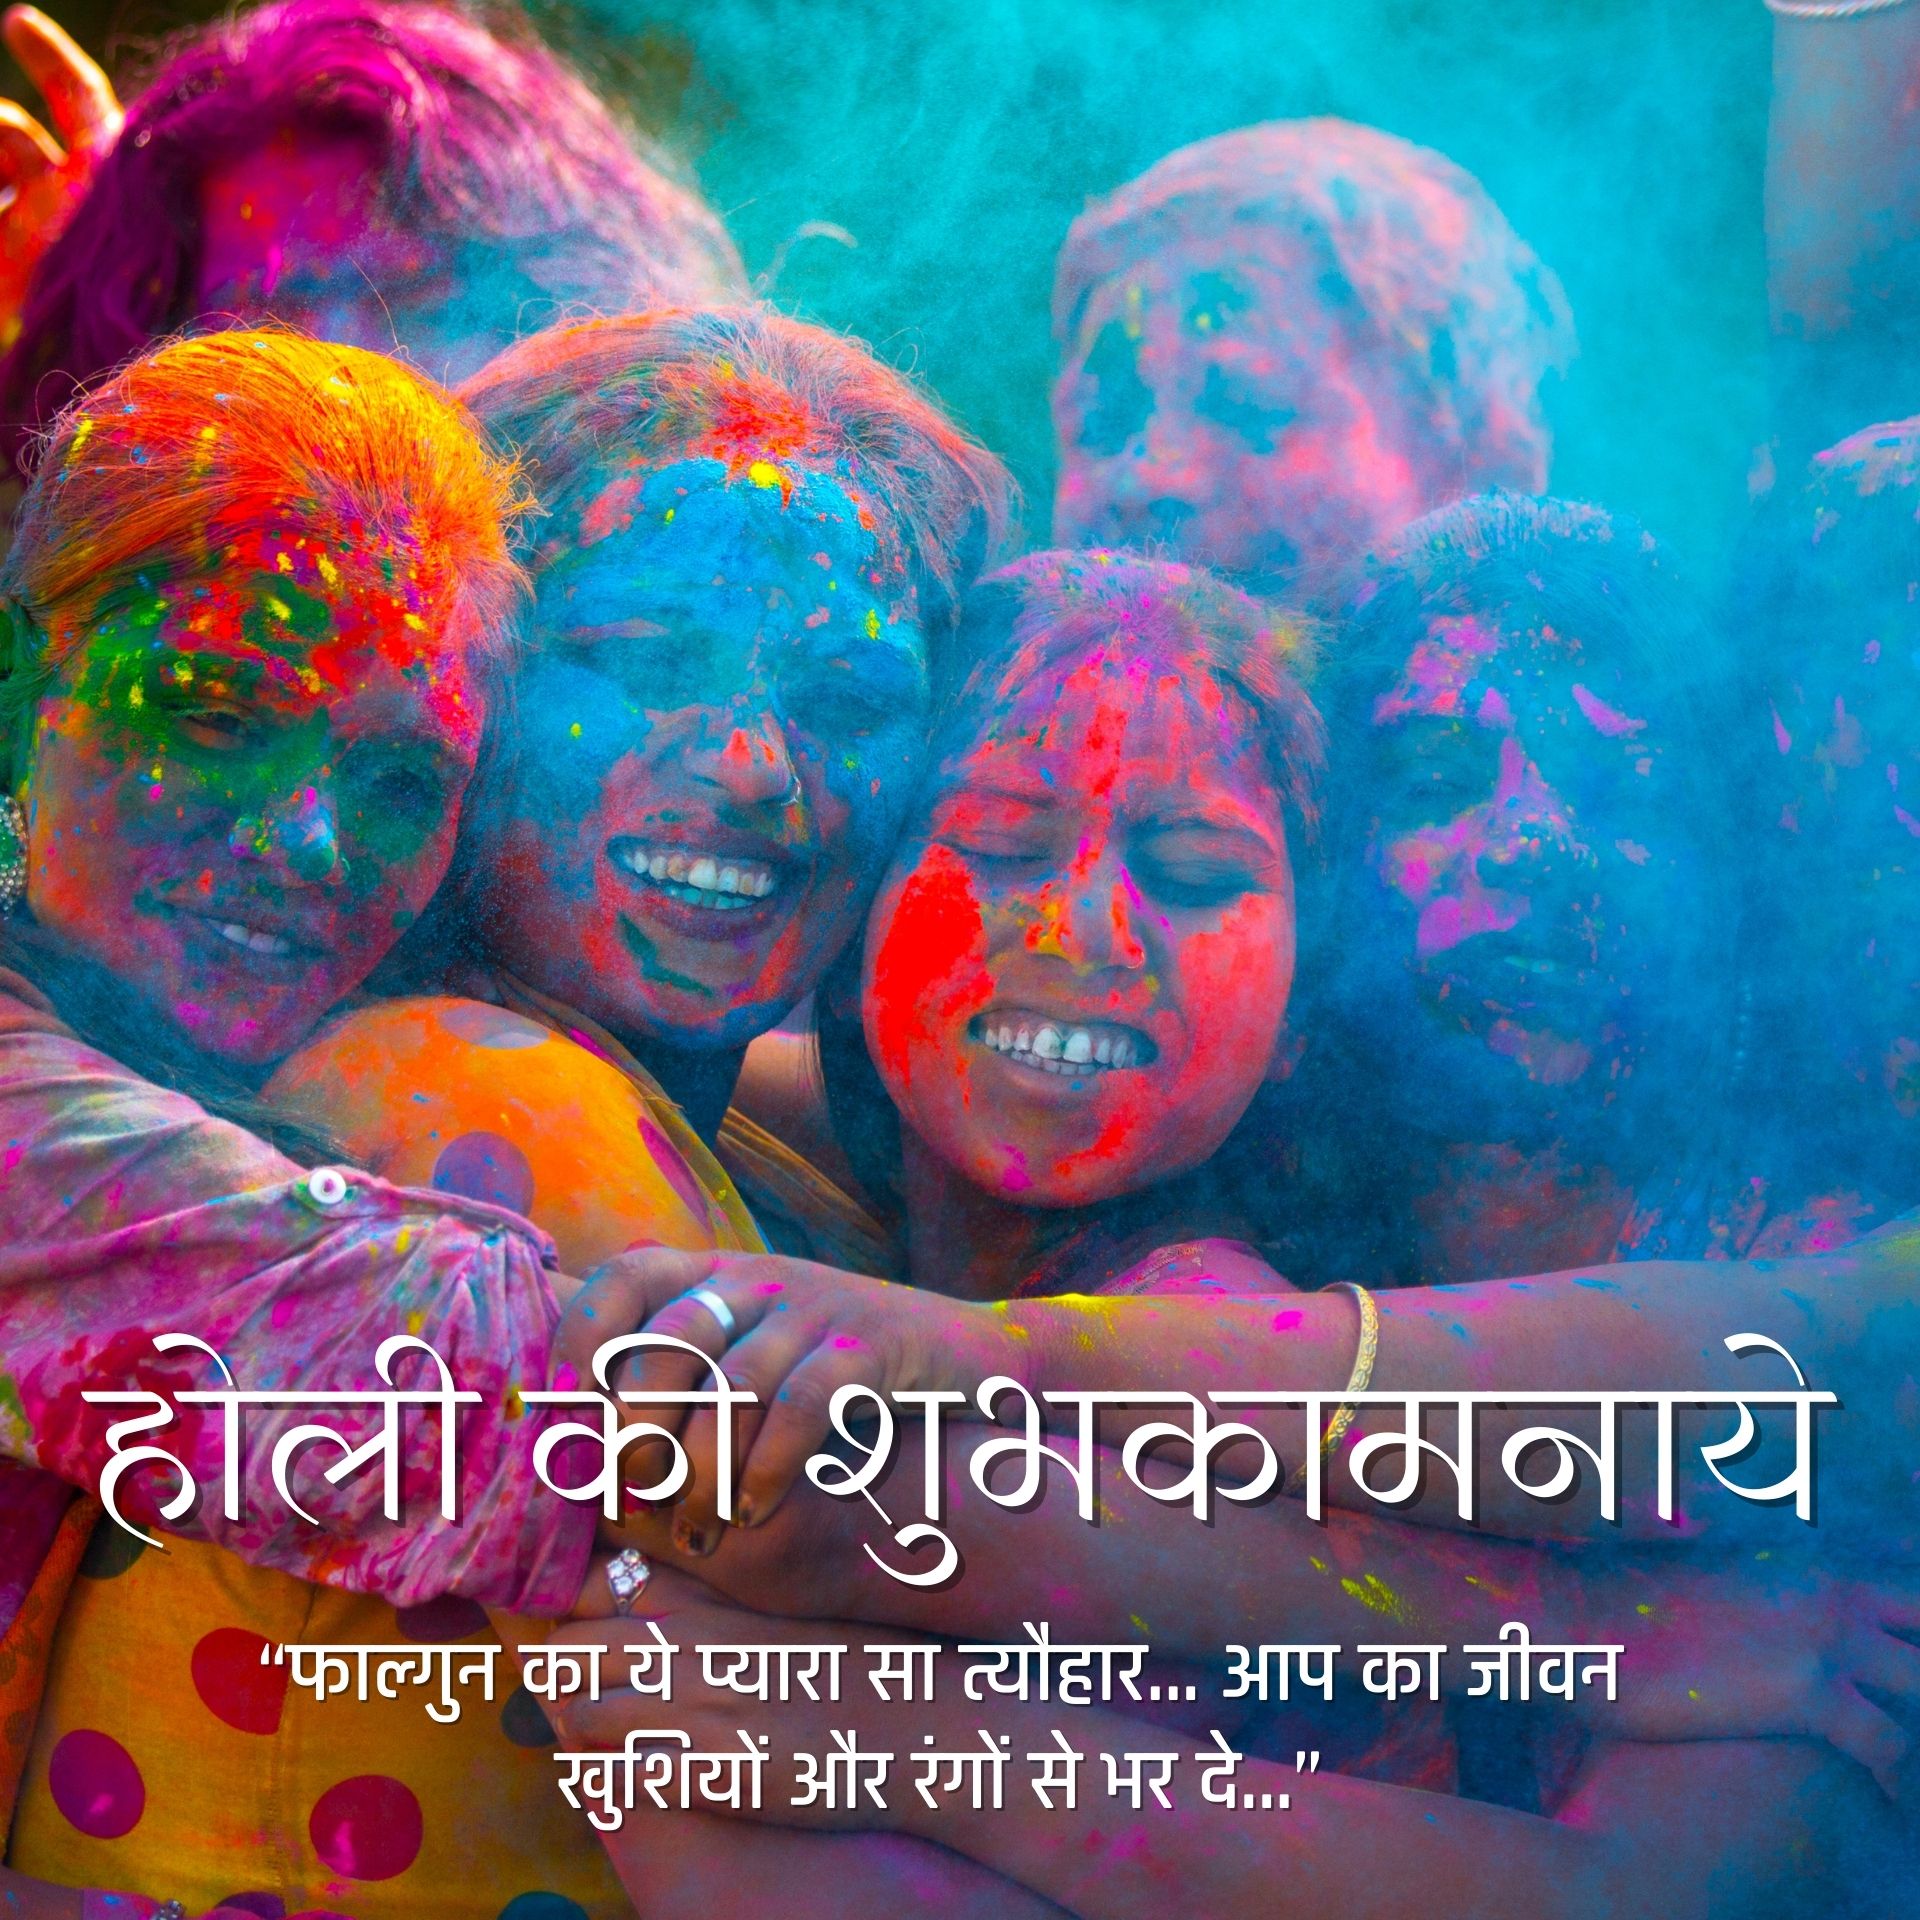 Happy Holi Images with Hindi Quotes